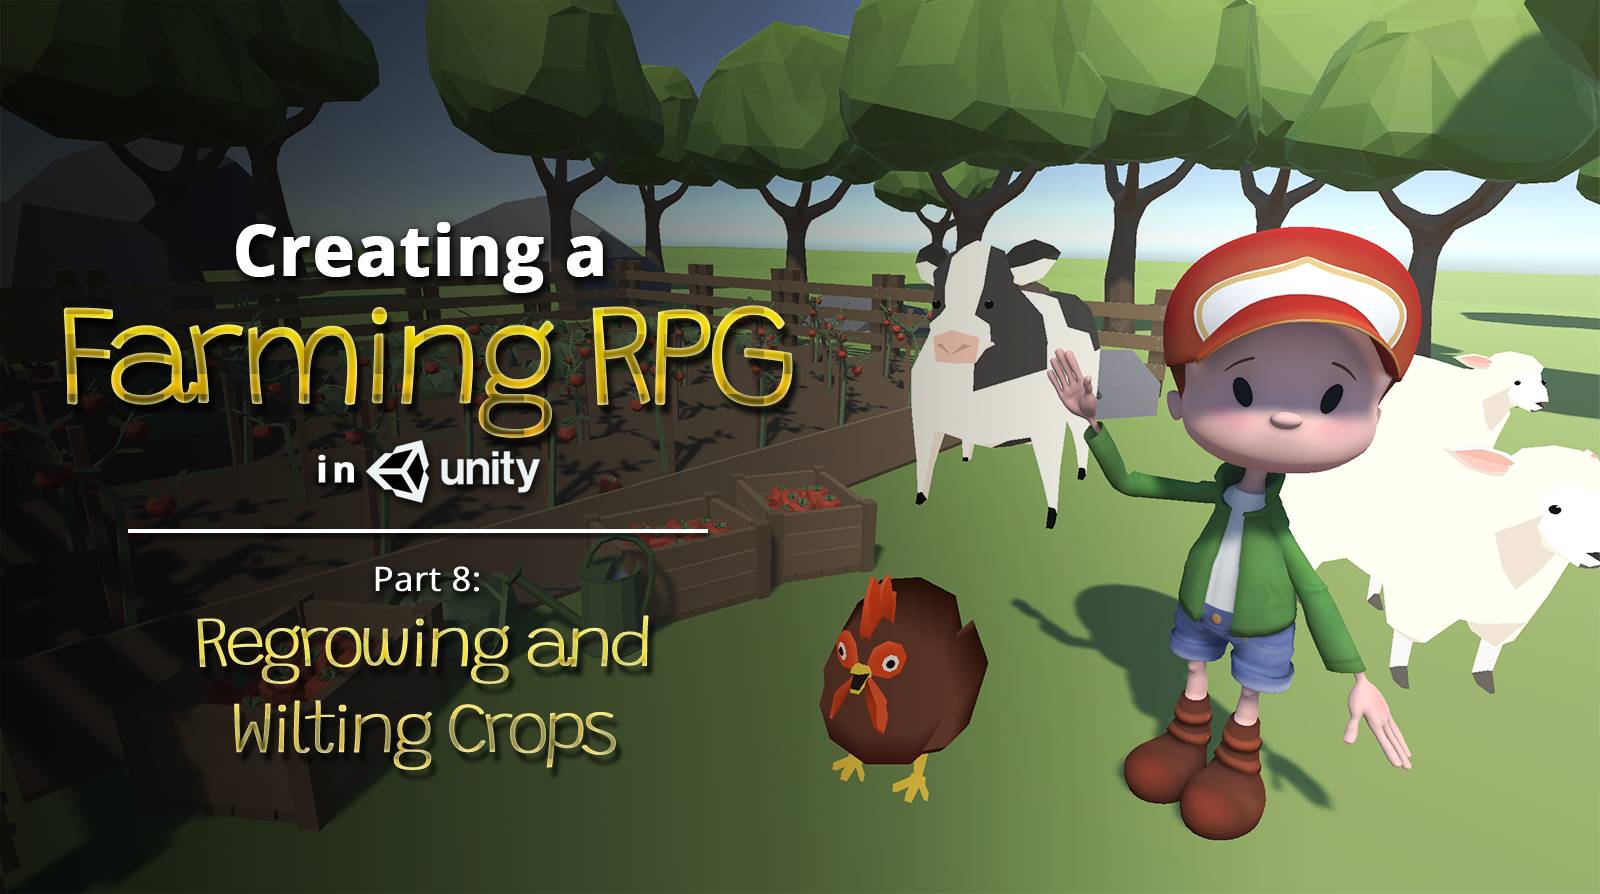 Creating a Farming RPG (like Harvest Moon) in Unity — Part 8: Regrowing and Wilting Crops